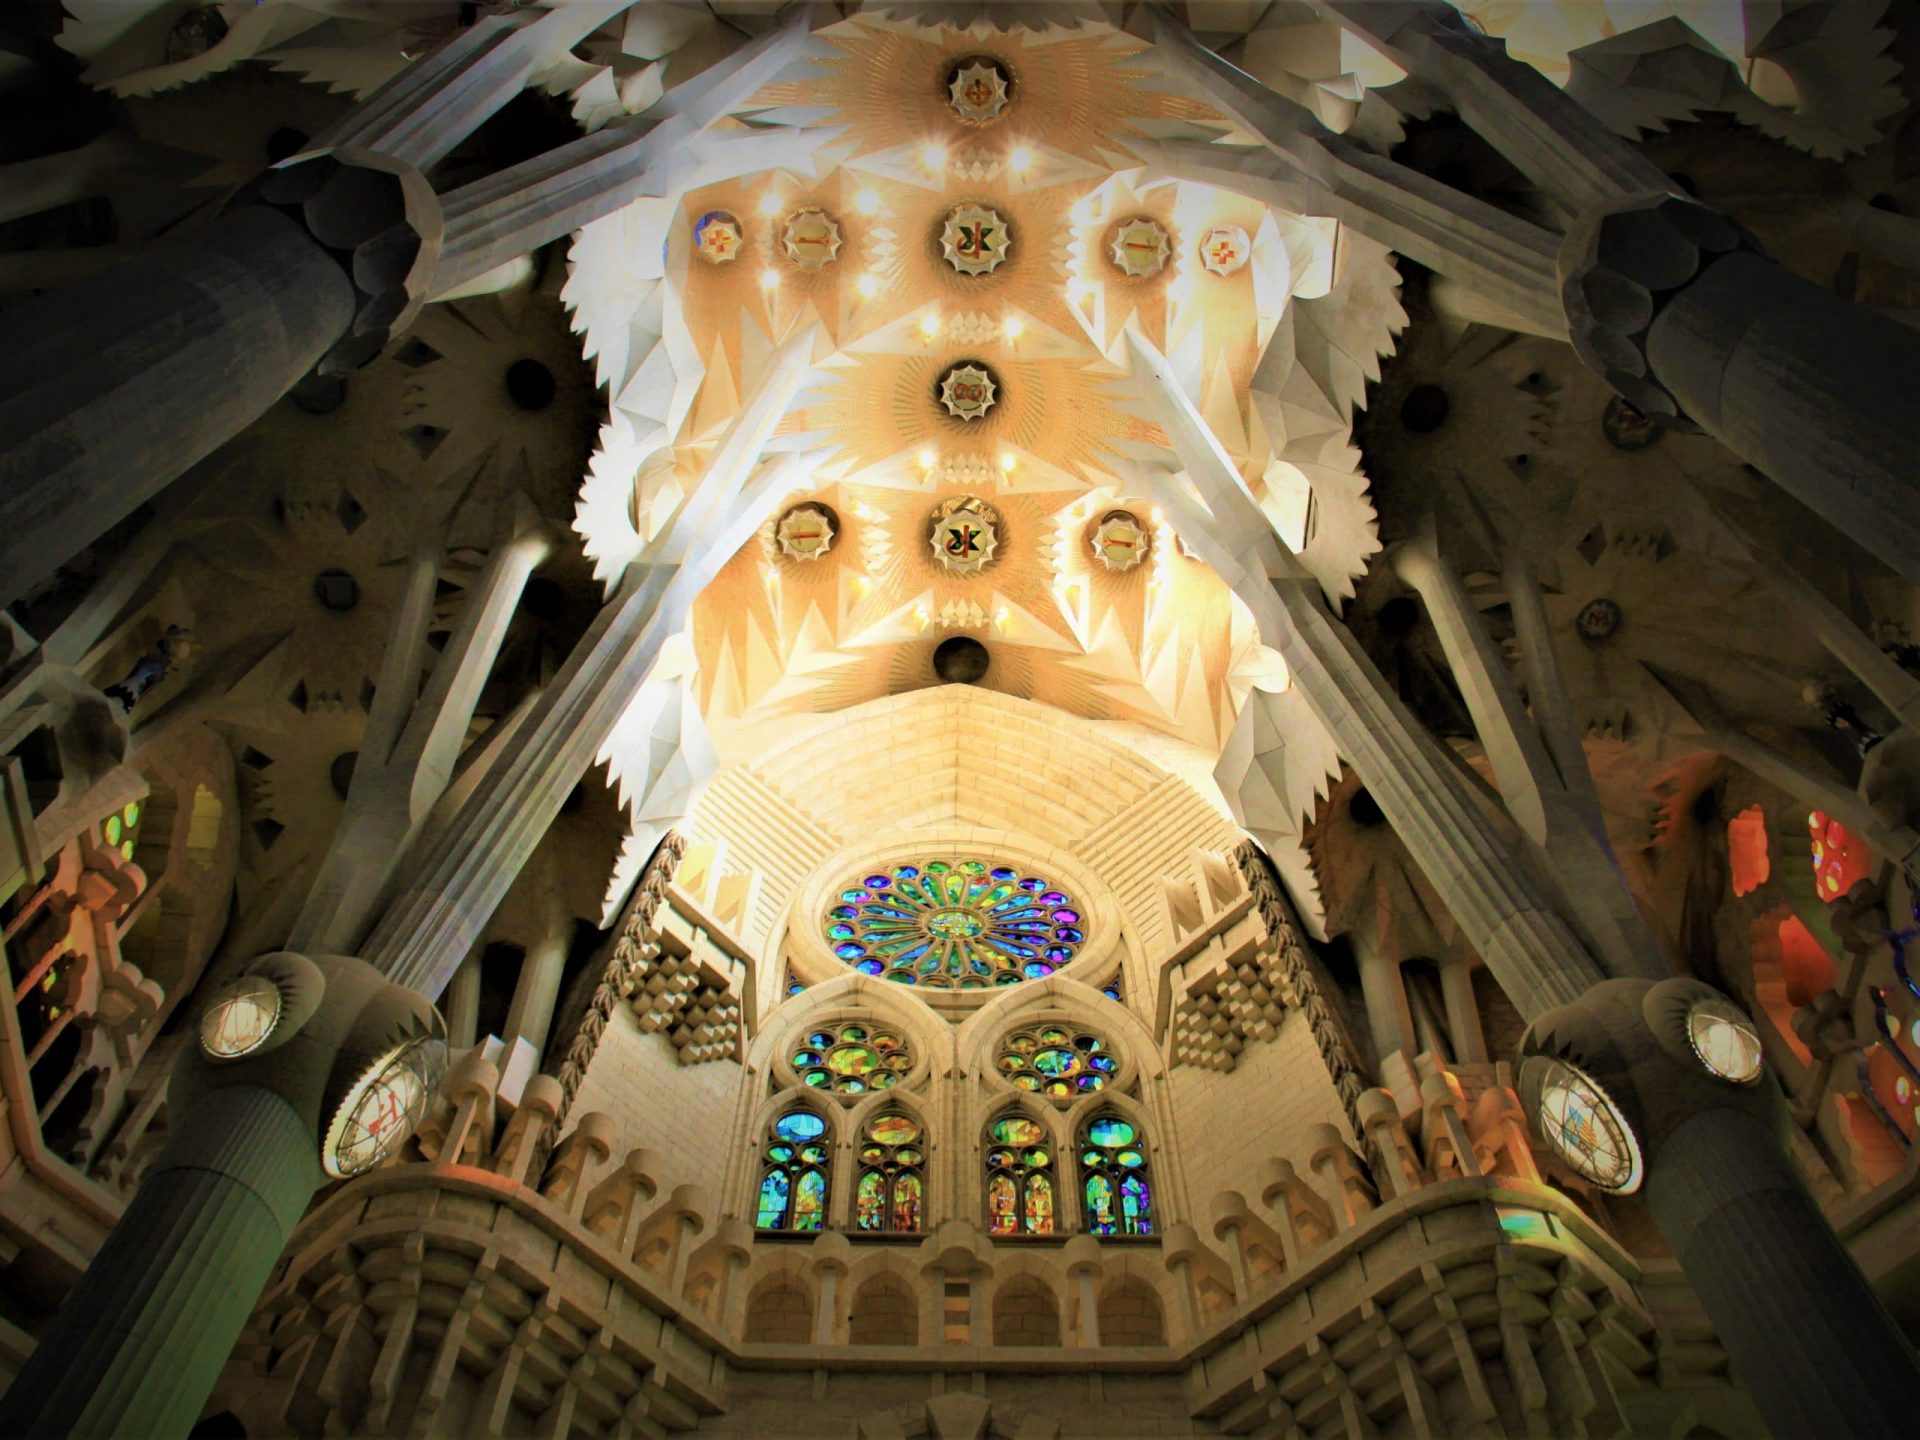 Sagrada Familia by Gaudi inside. Stone columns, geometrical ceiling and colored stained-glass.